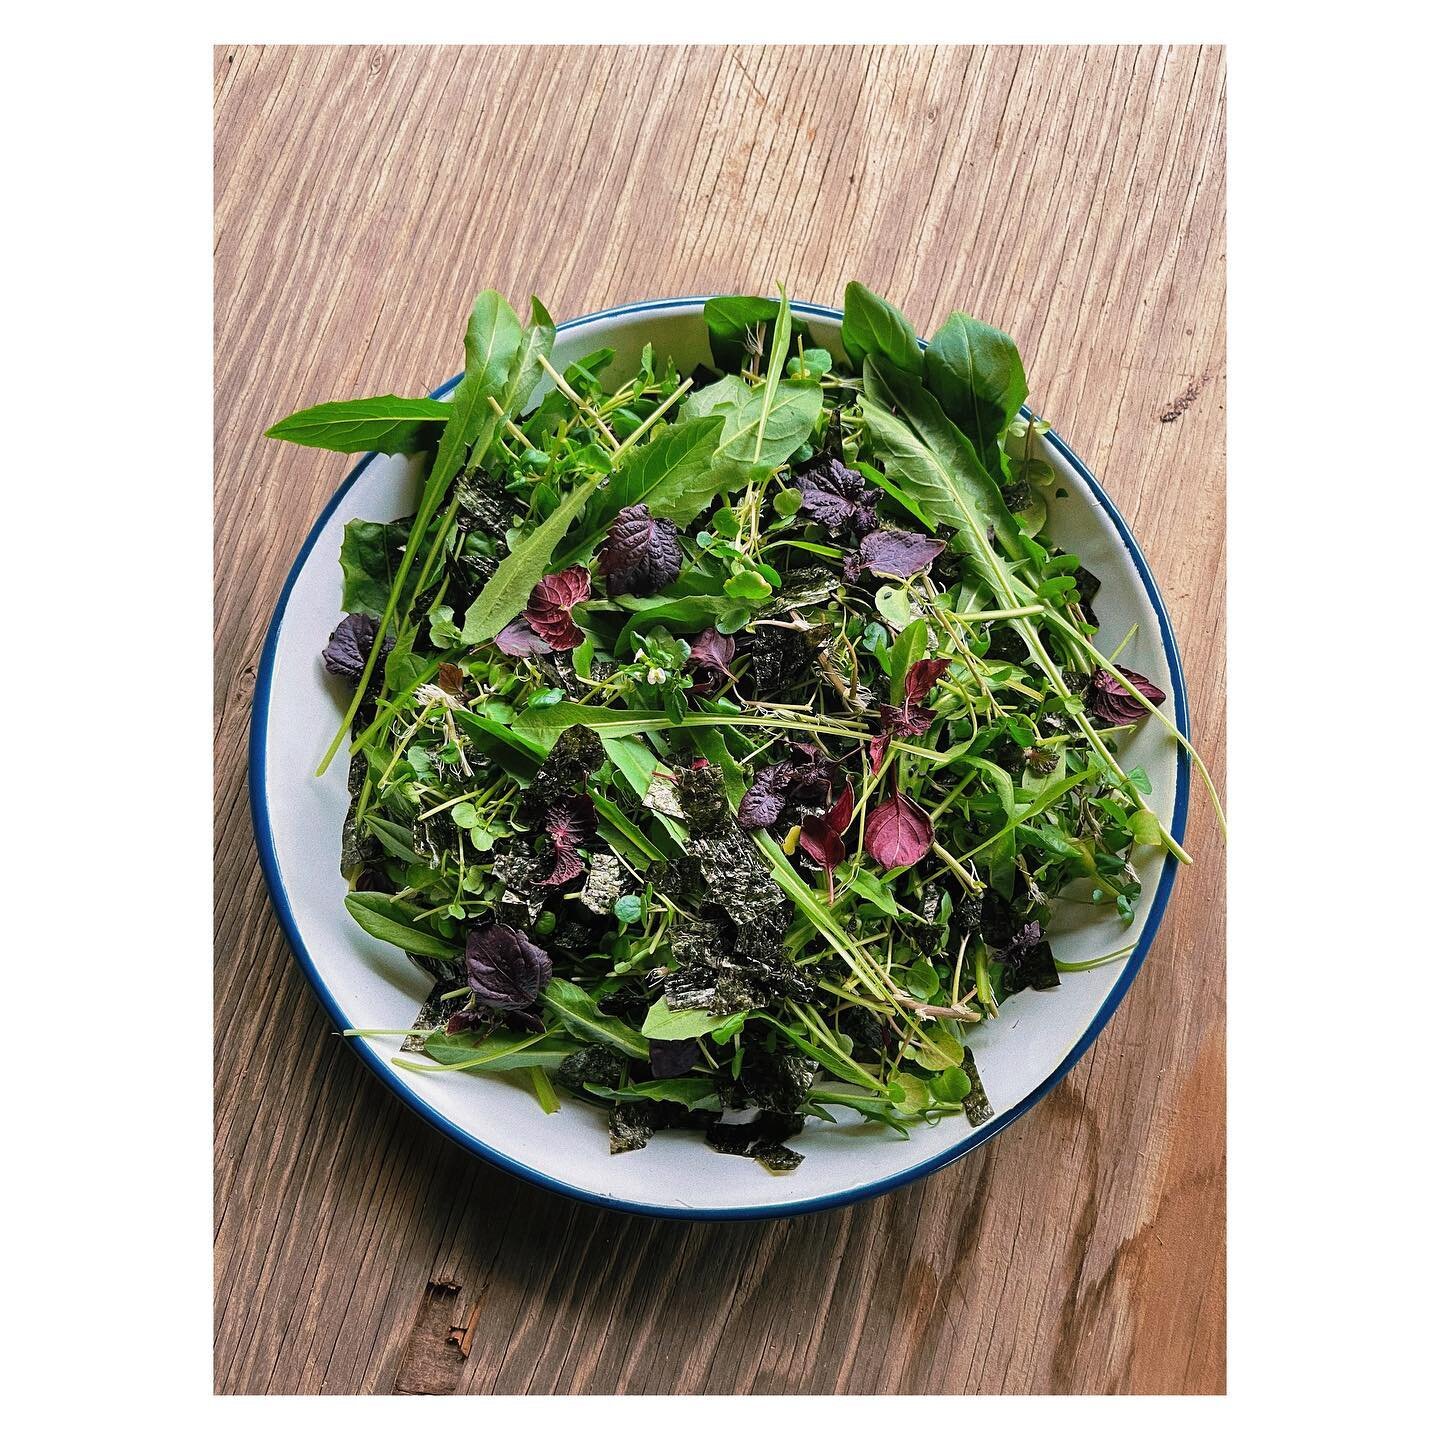 Chicory, watercress and shiso leaves from the hydroponics, with a mirin/rice vinegar dressing, nori and unhulled black sesame seeds